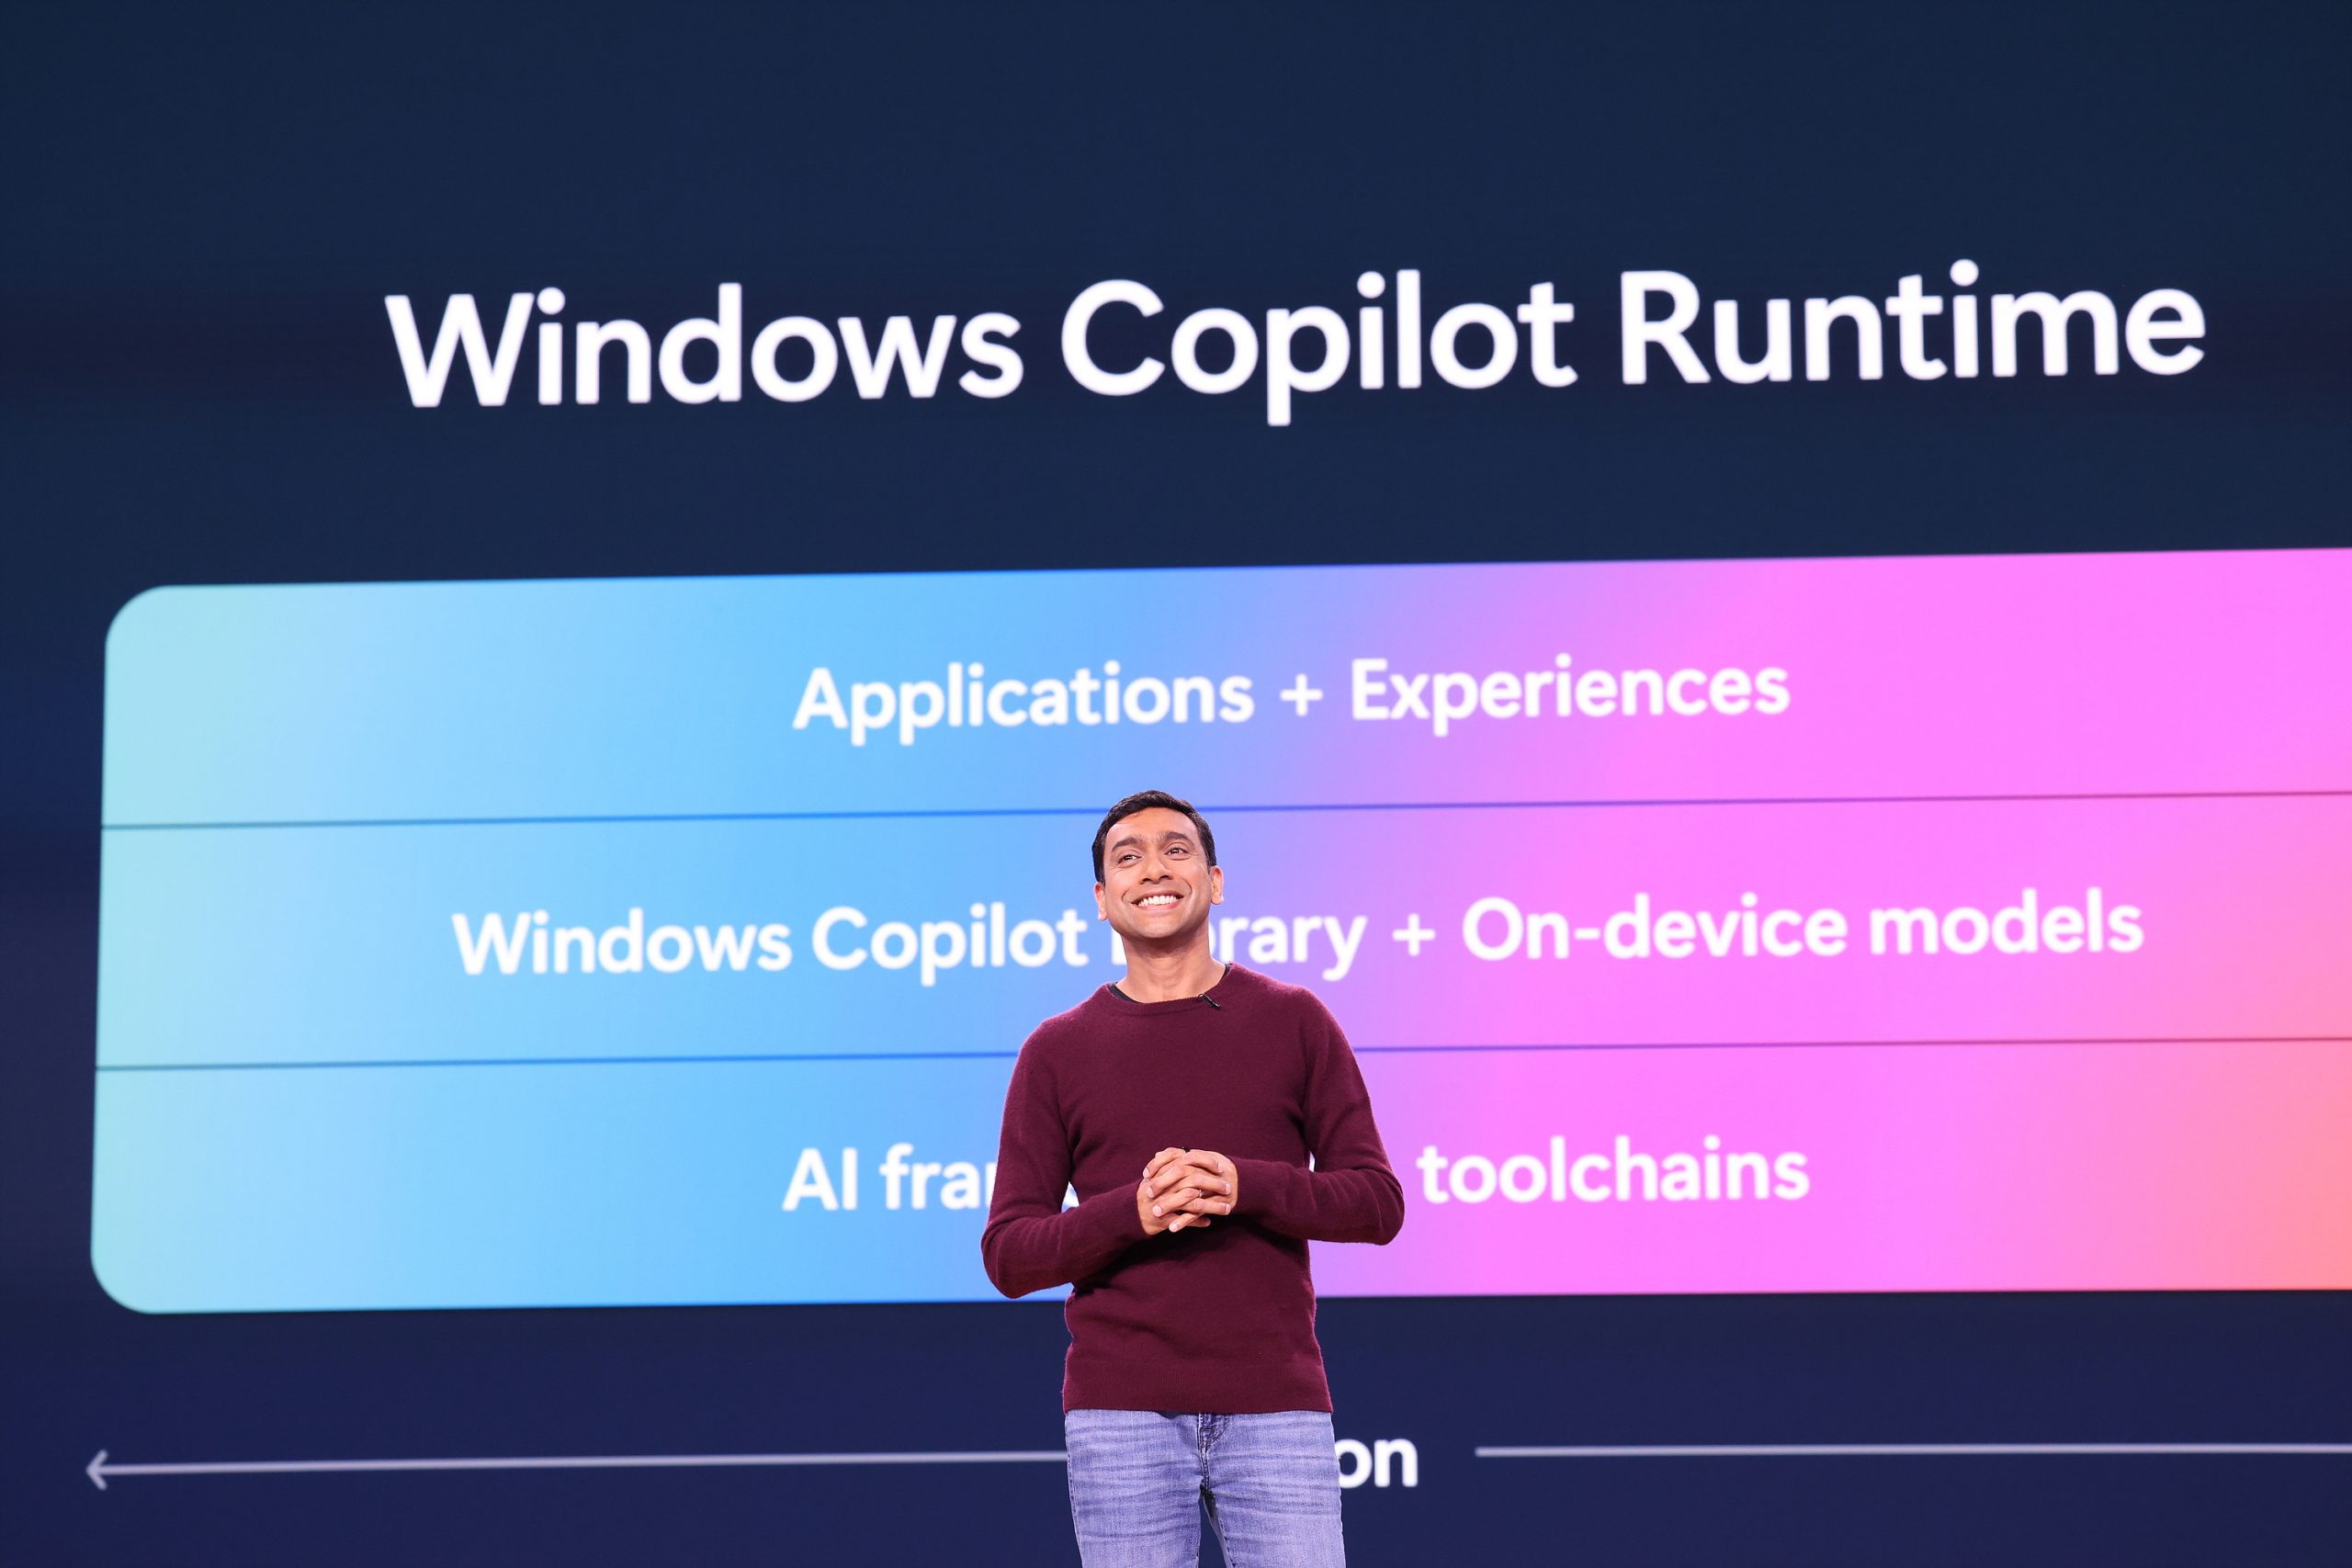 A man standing on stage, text on a screen behind him that outlines elements of Windows Copilot Runtime